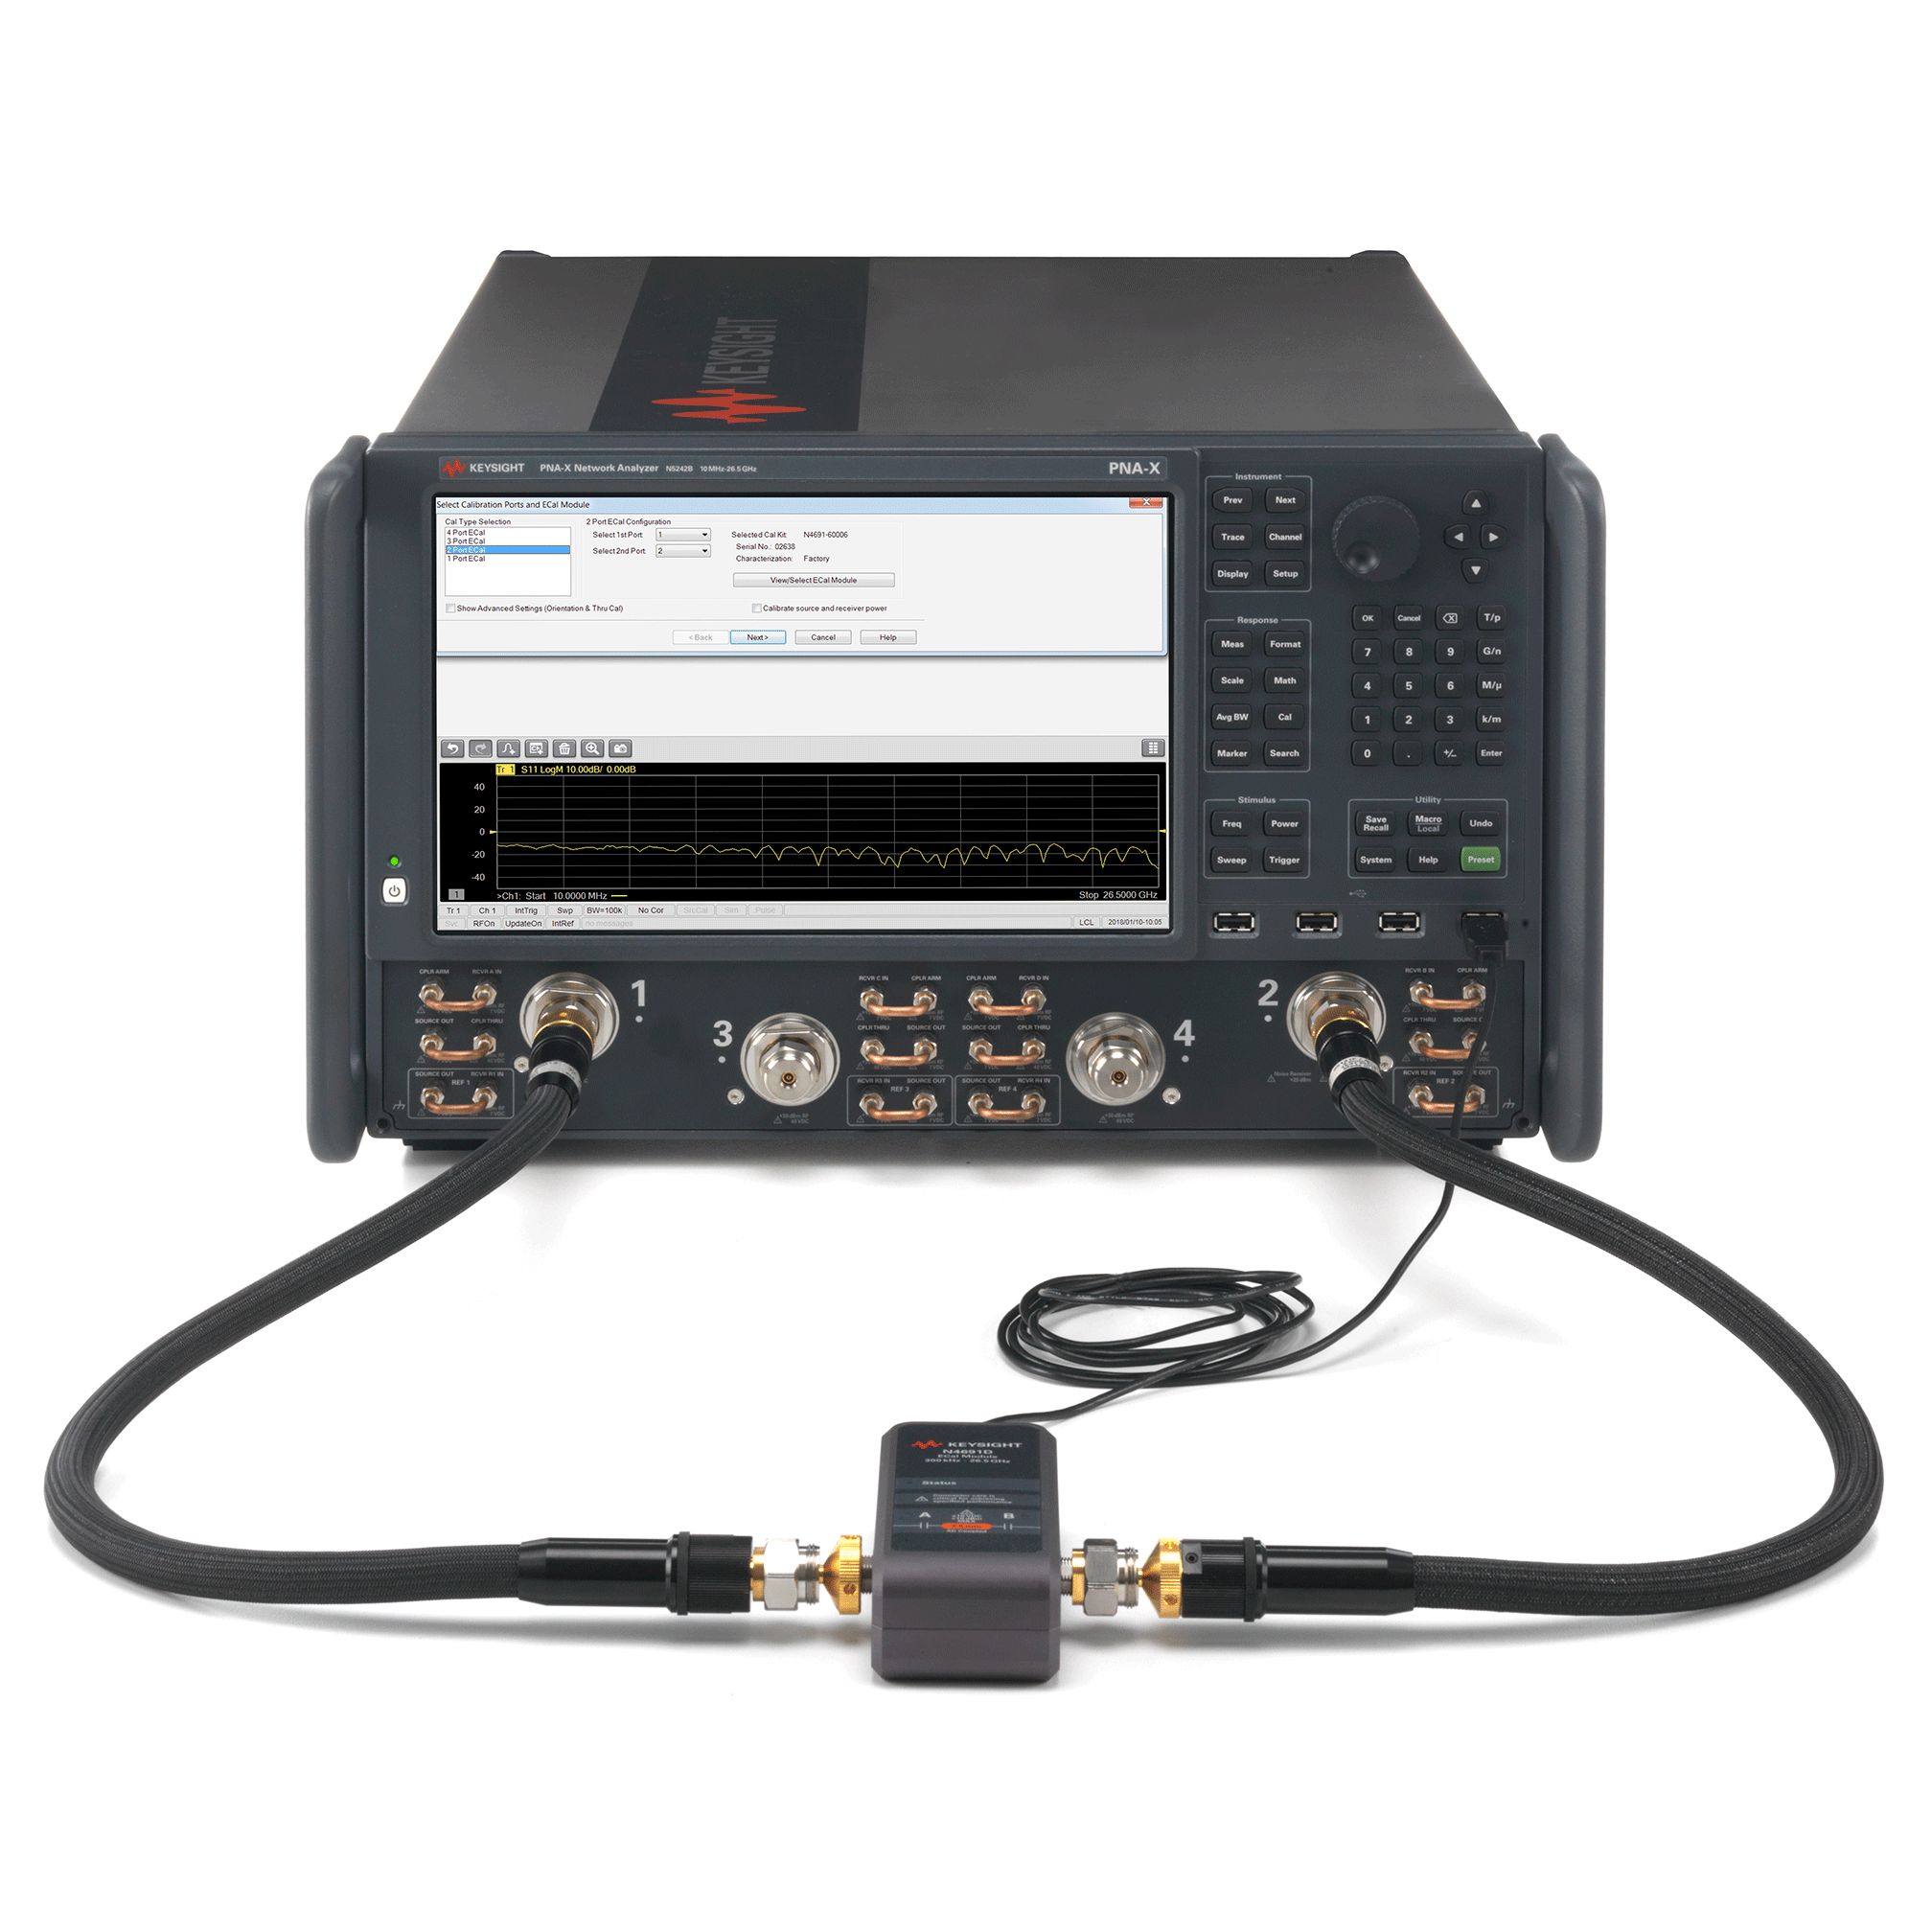 Picture of a Keysight Technologies N4691D